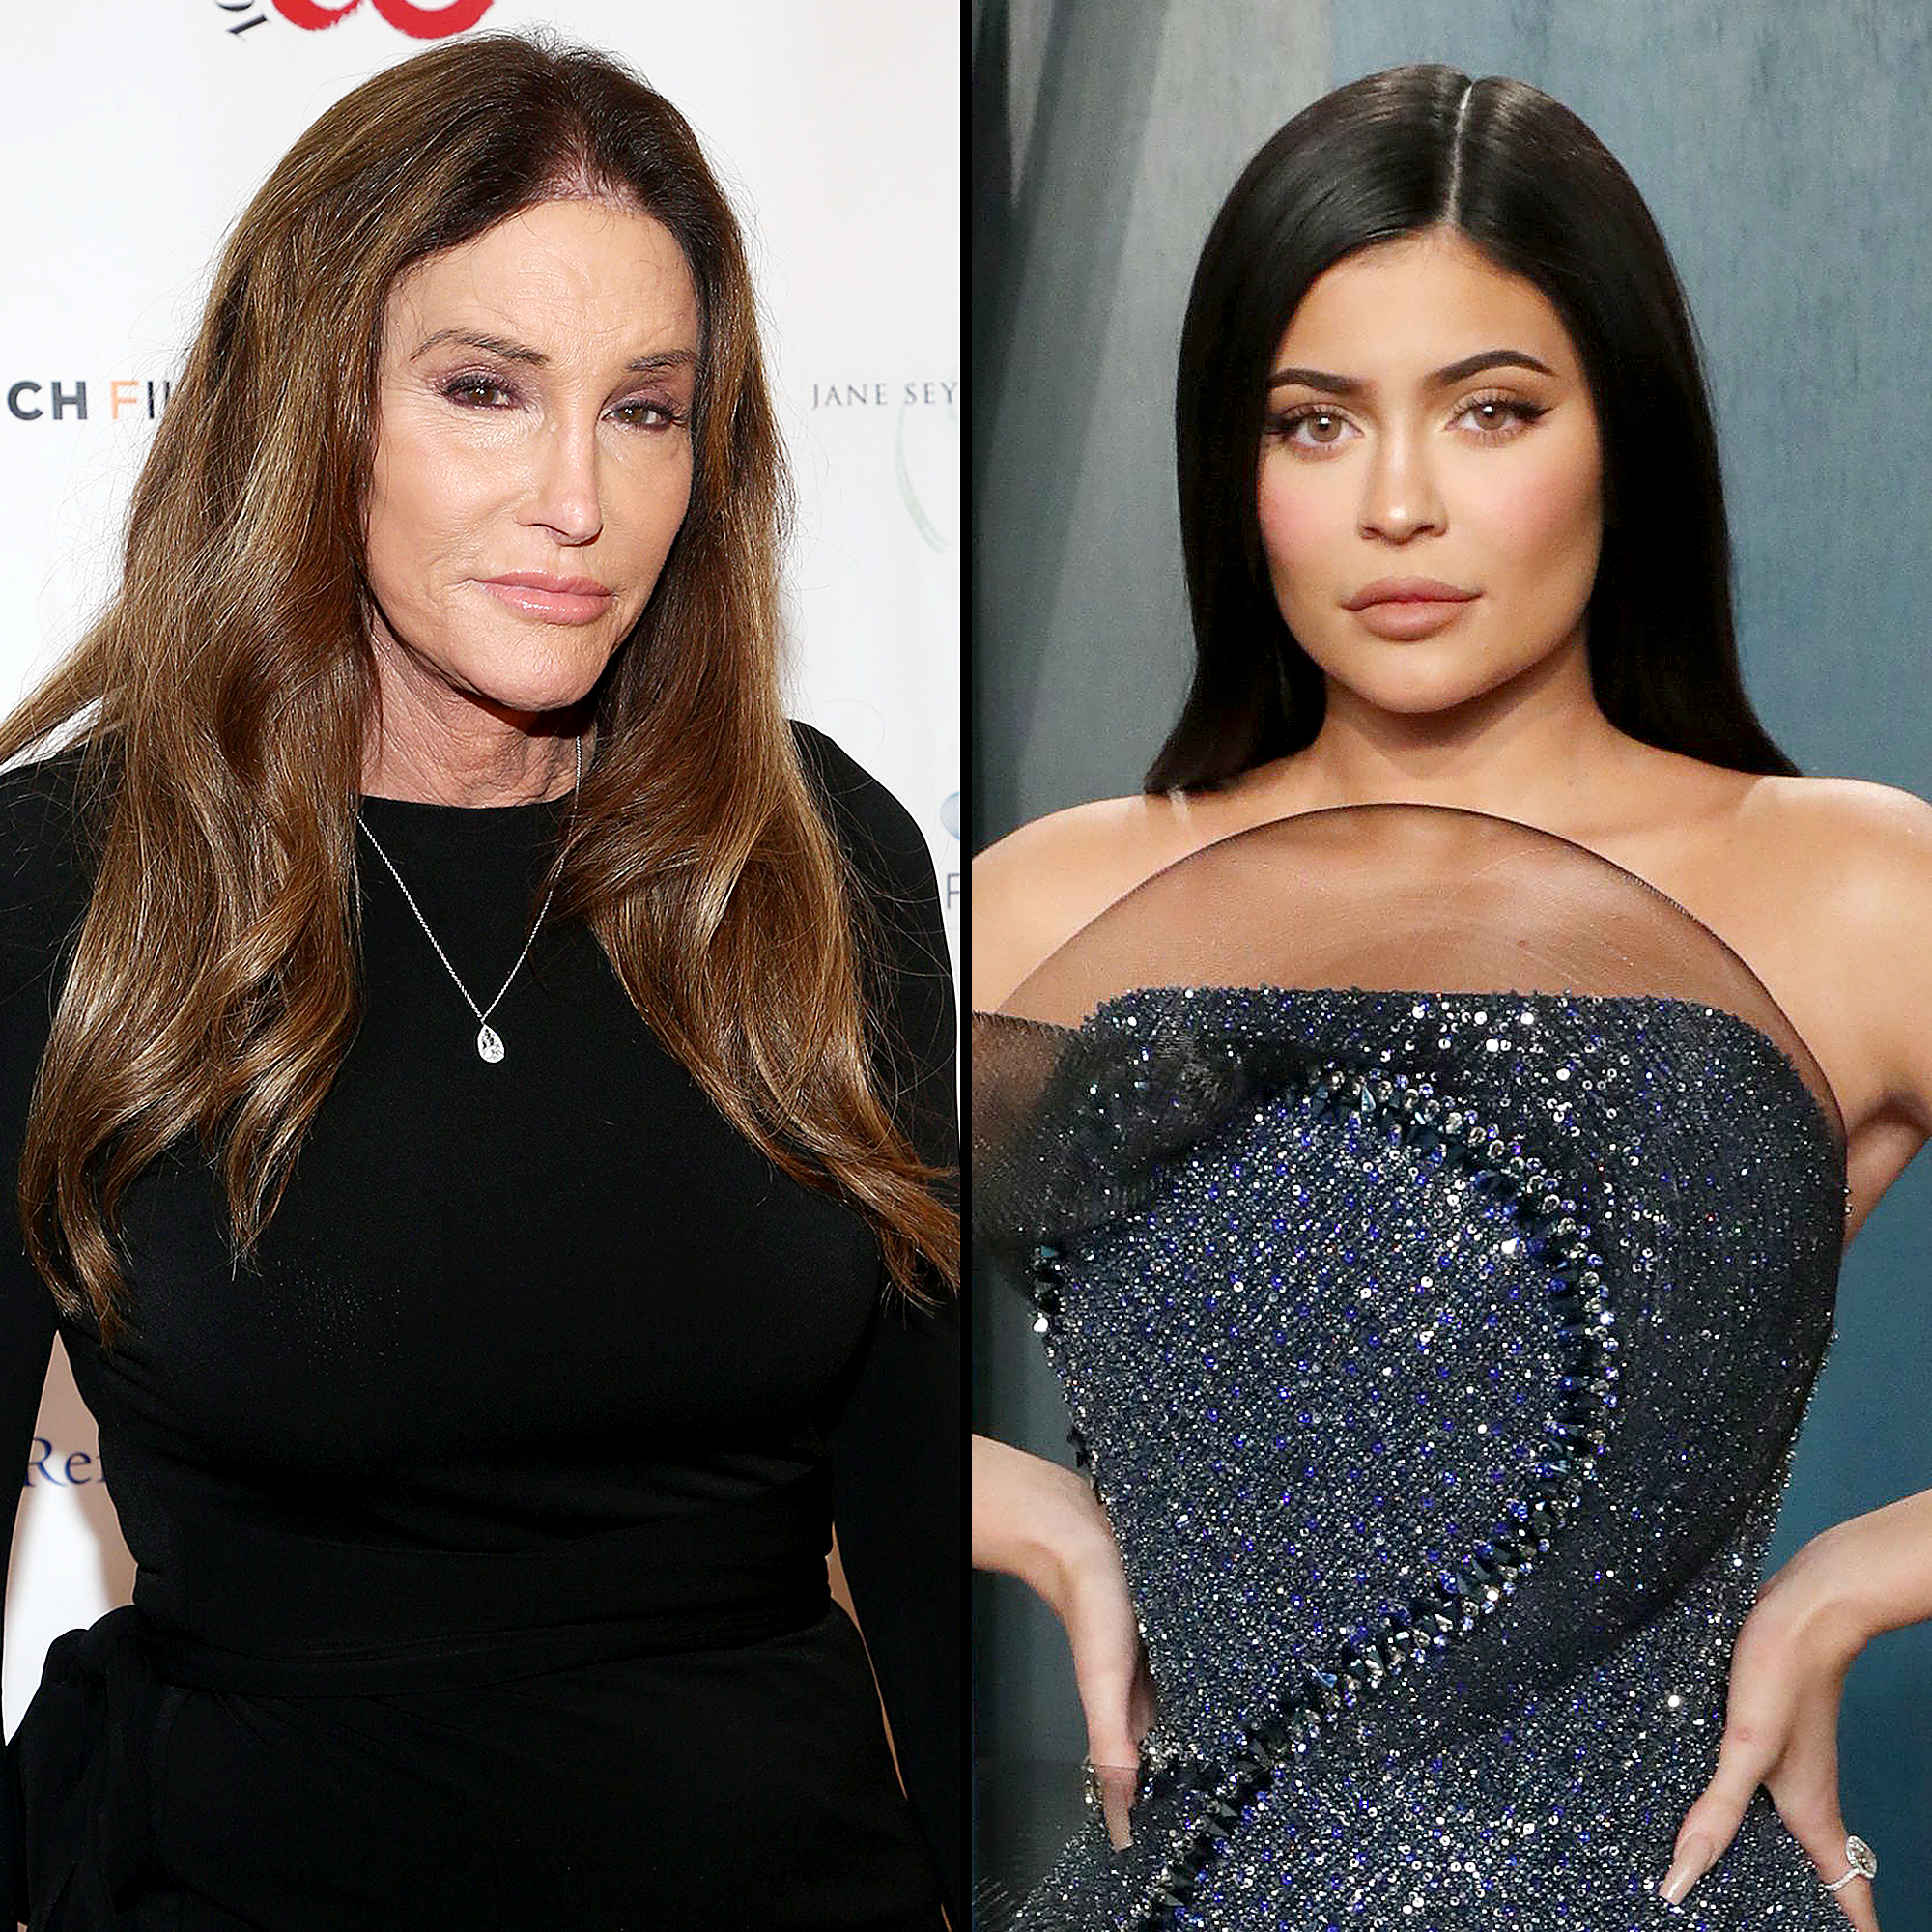 Bruce Jenner Sex Porn - Caitlyn Jenner Opens Up About Her Close Bond With Kylie Jenner